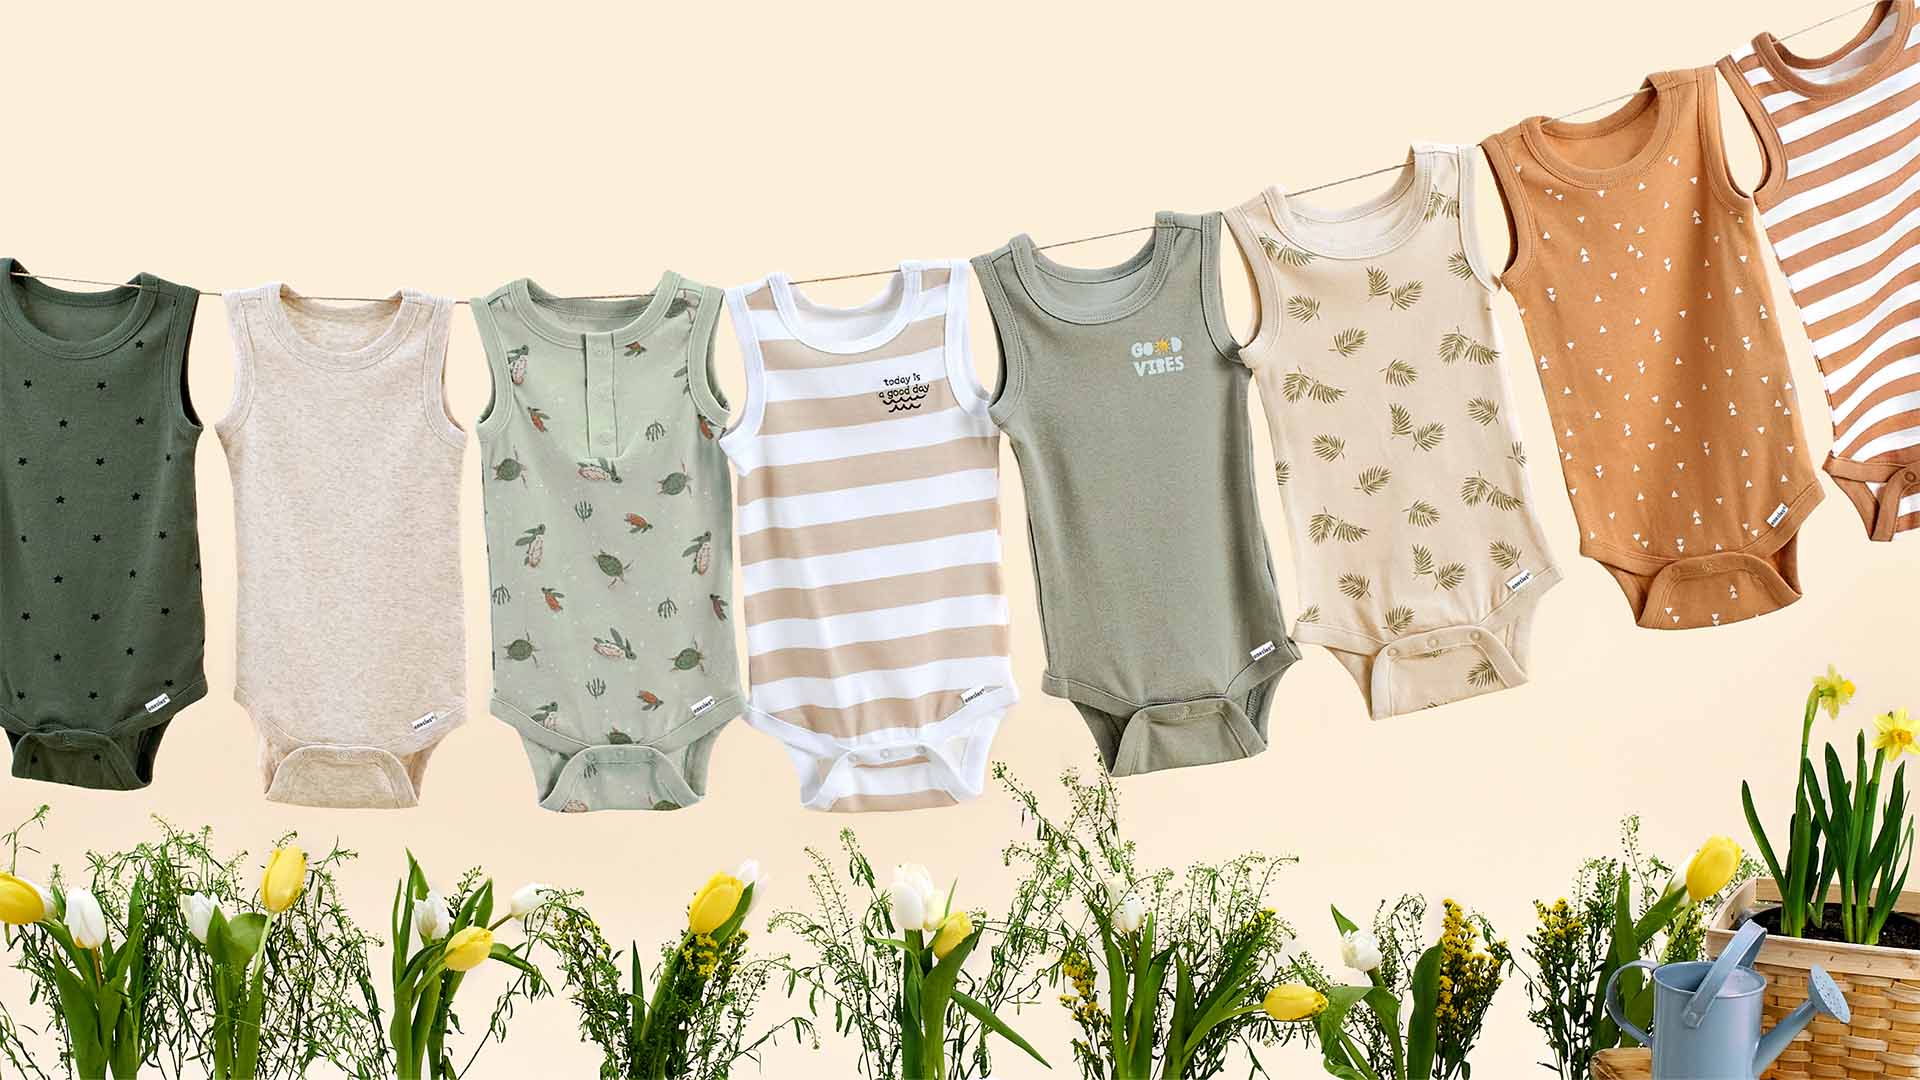 Spring colored baby boy bodysuits hanging on a clothesline,